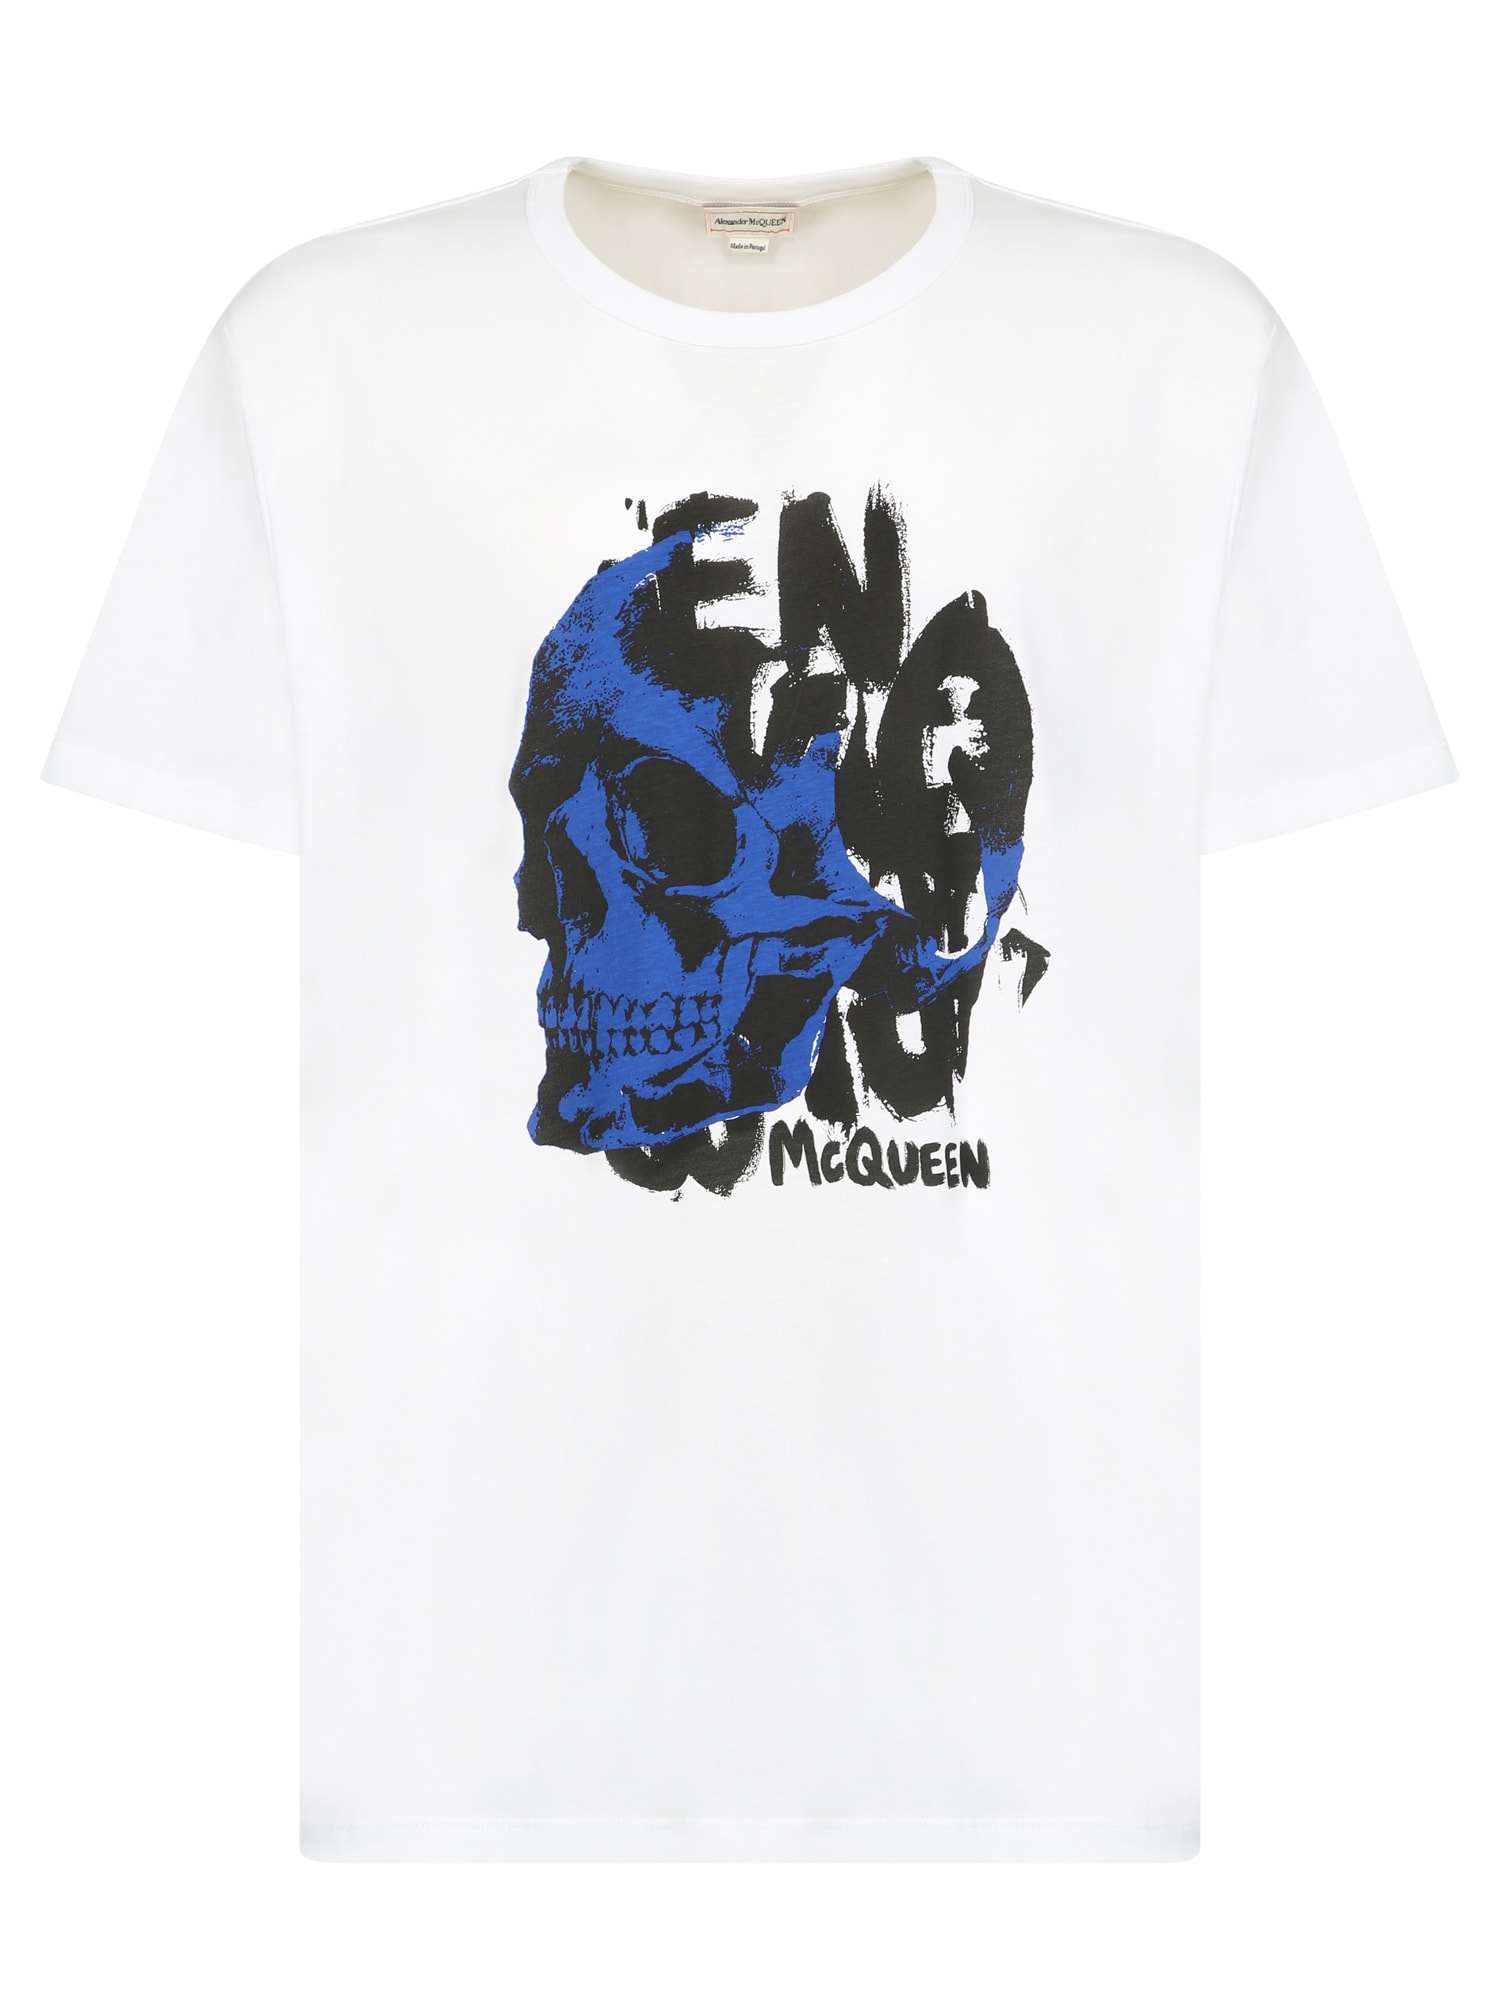 Alexander Mcqueen Basic T-shirt But From The Gothic Area Given By The Presence Of Prints With Skulls